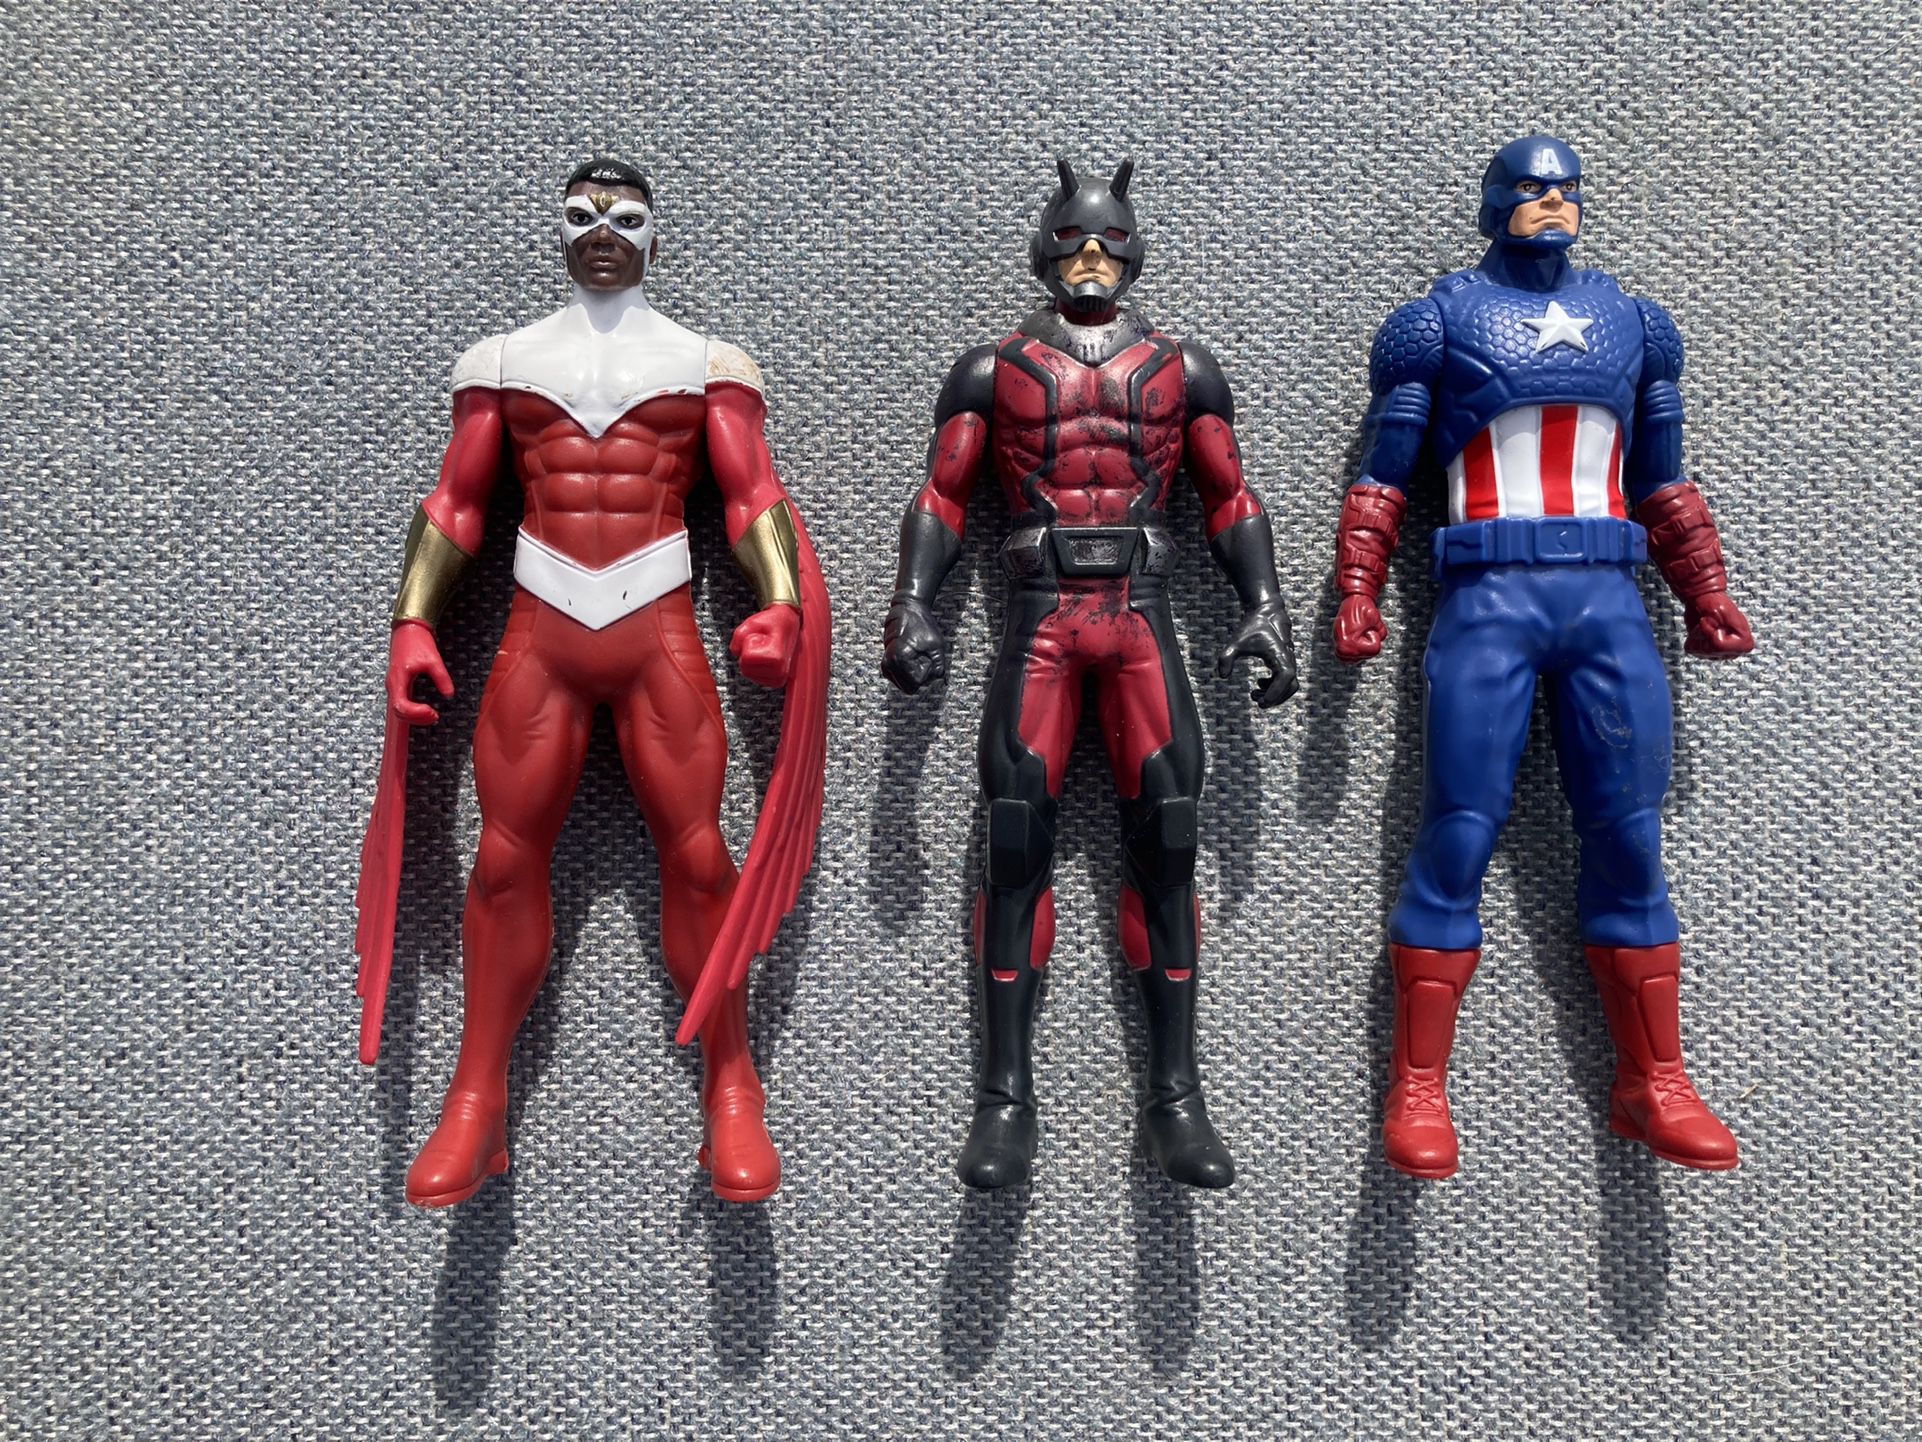 Legend Captain America And Ant man  Figures